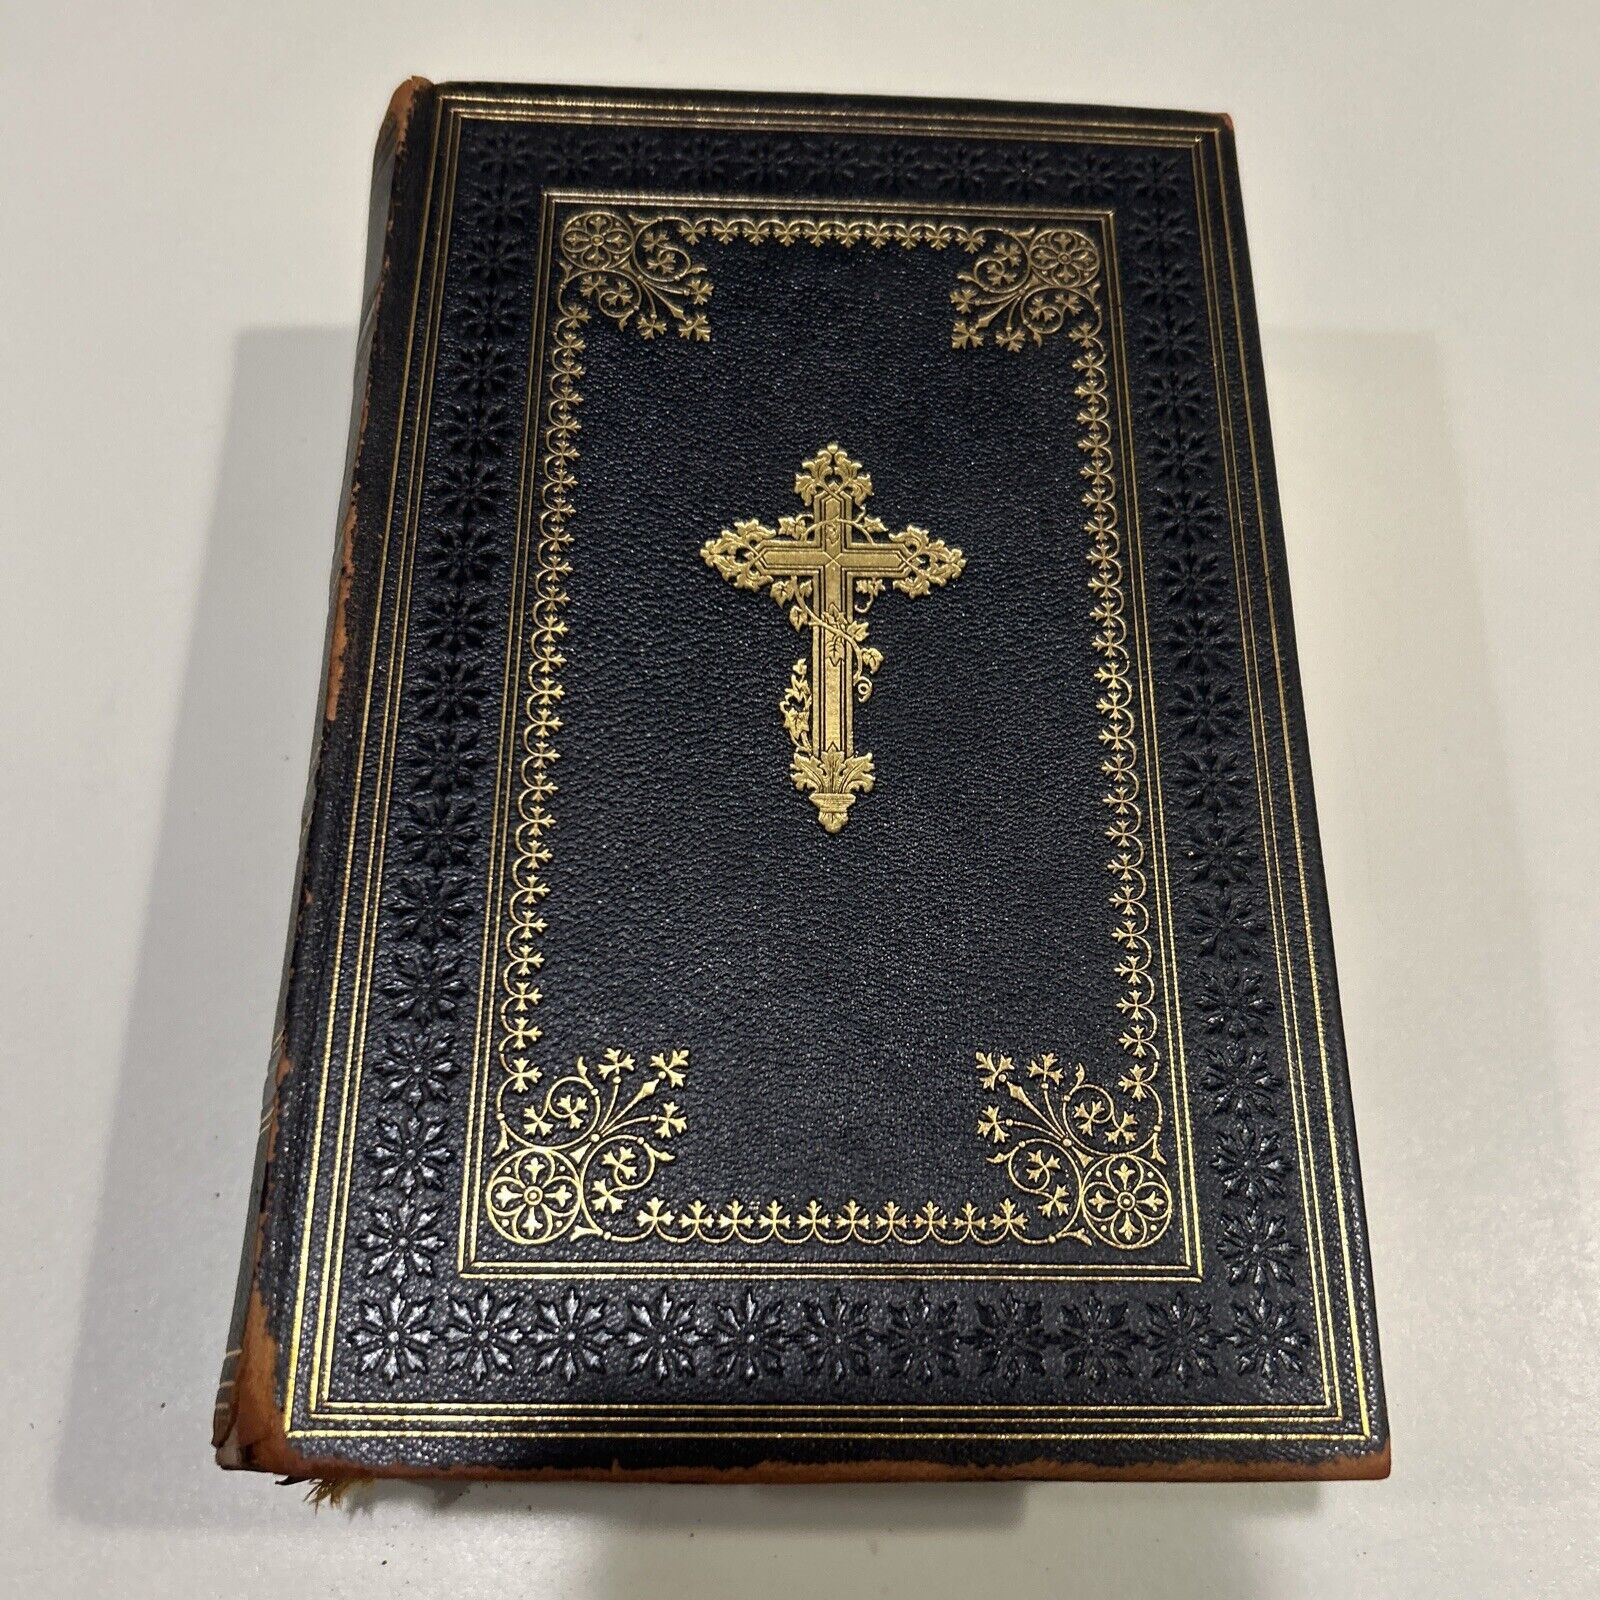 Late 1800s Early 1900s Rare Vintage German Bible Martin Luther Edition Die Bibel